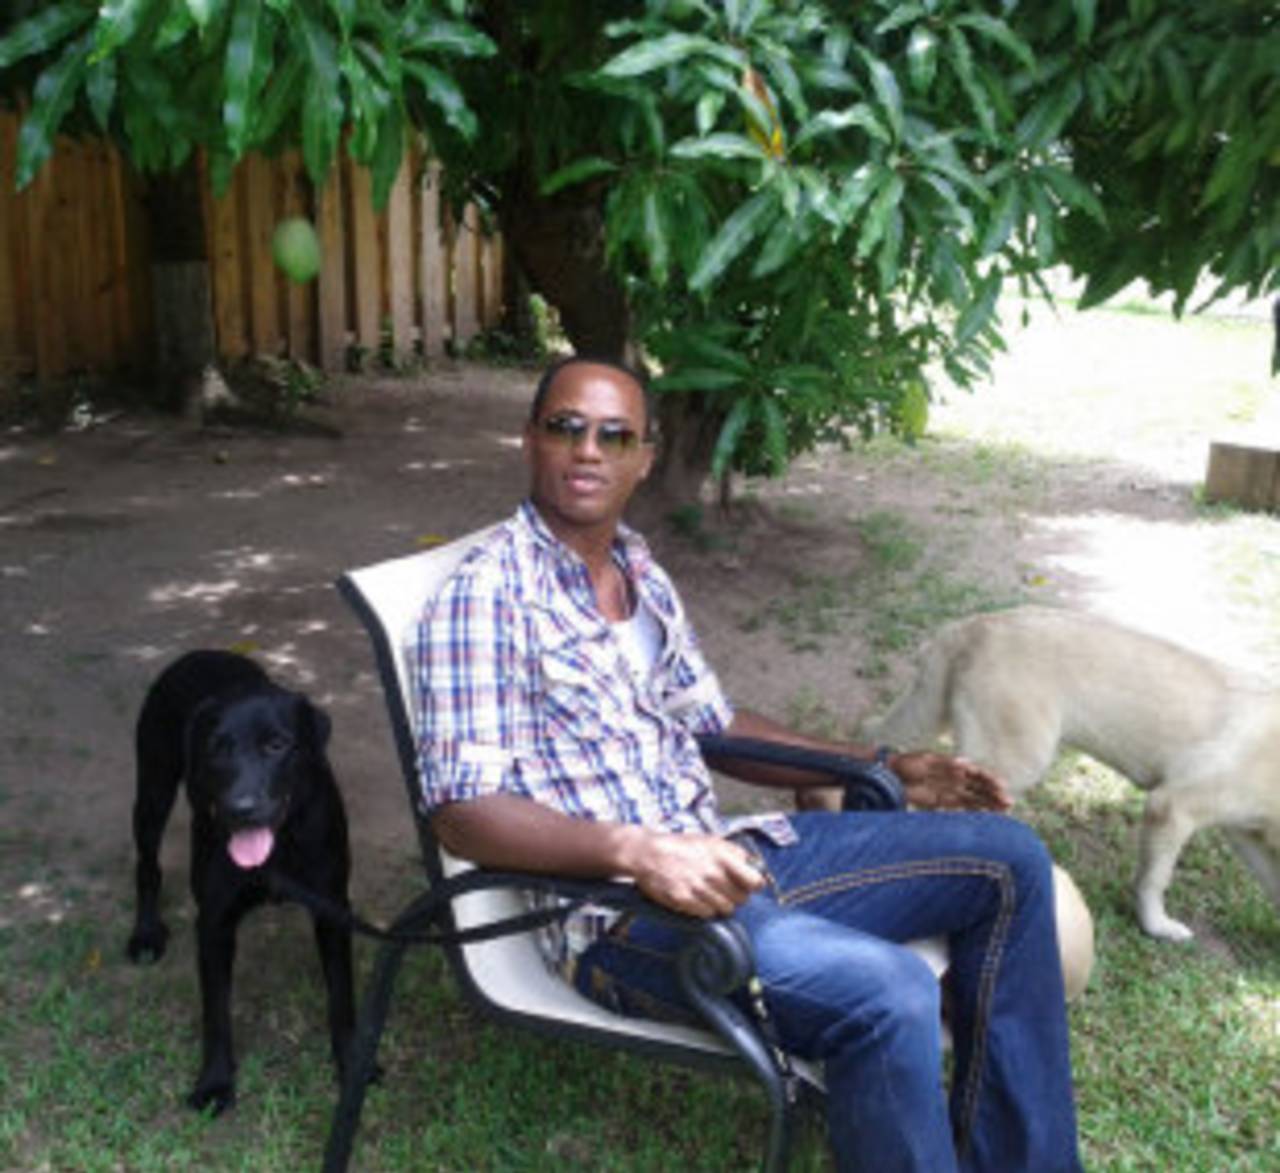 Marlon Samuels at home with his dogs, June 26, 2011